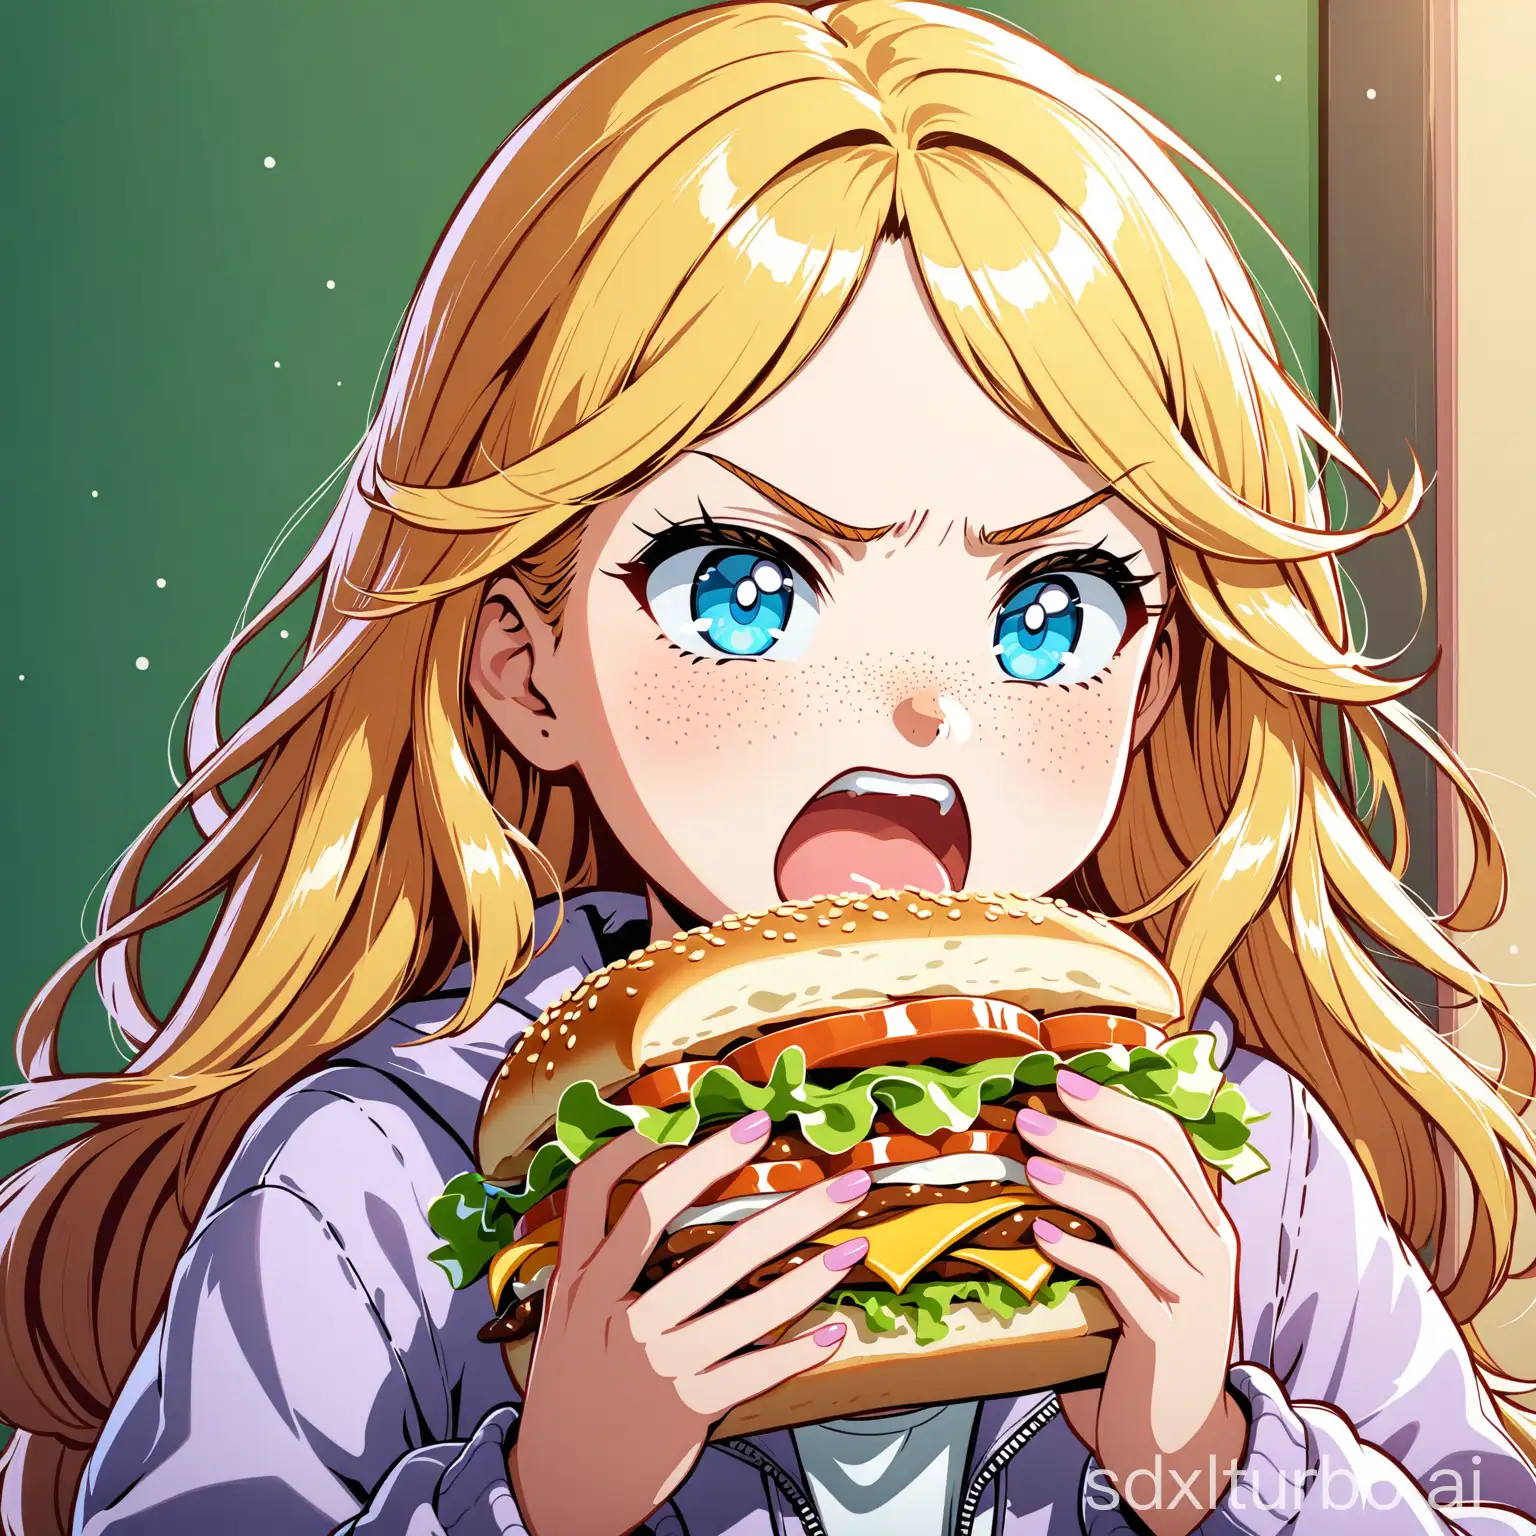 A thin low stature blonde girl, blue eyes, with curvy and frizzy long hair, bangs, freckles, with grey-violet university jacket, eating a sandwich, angry face